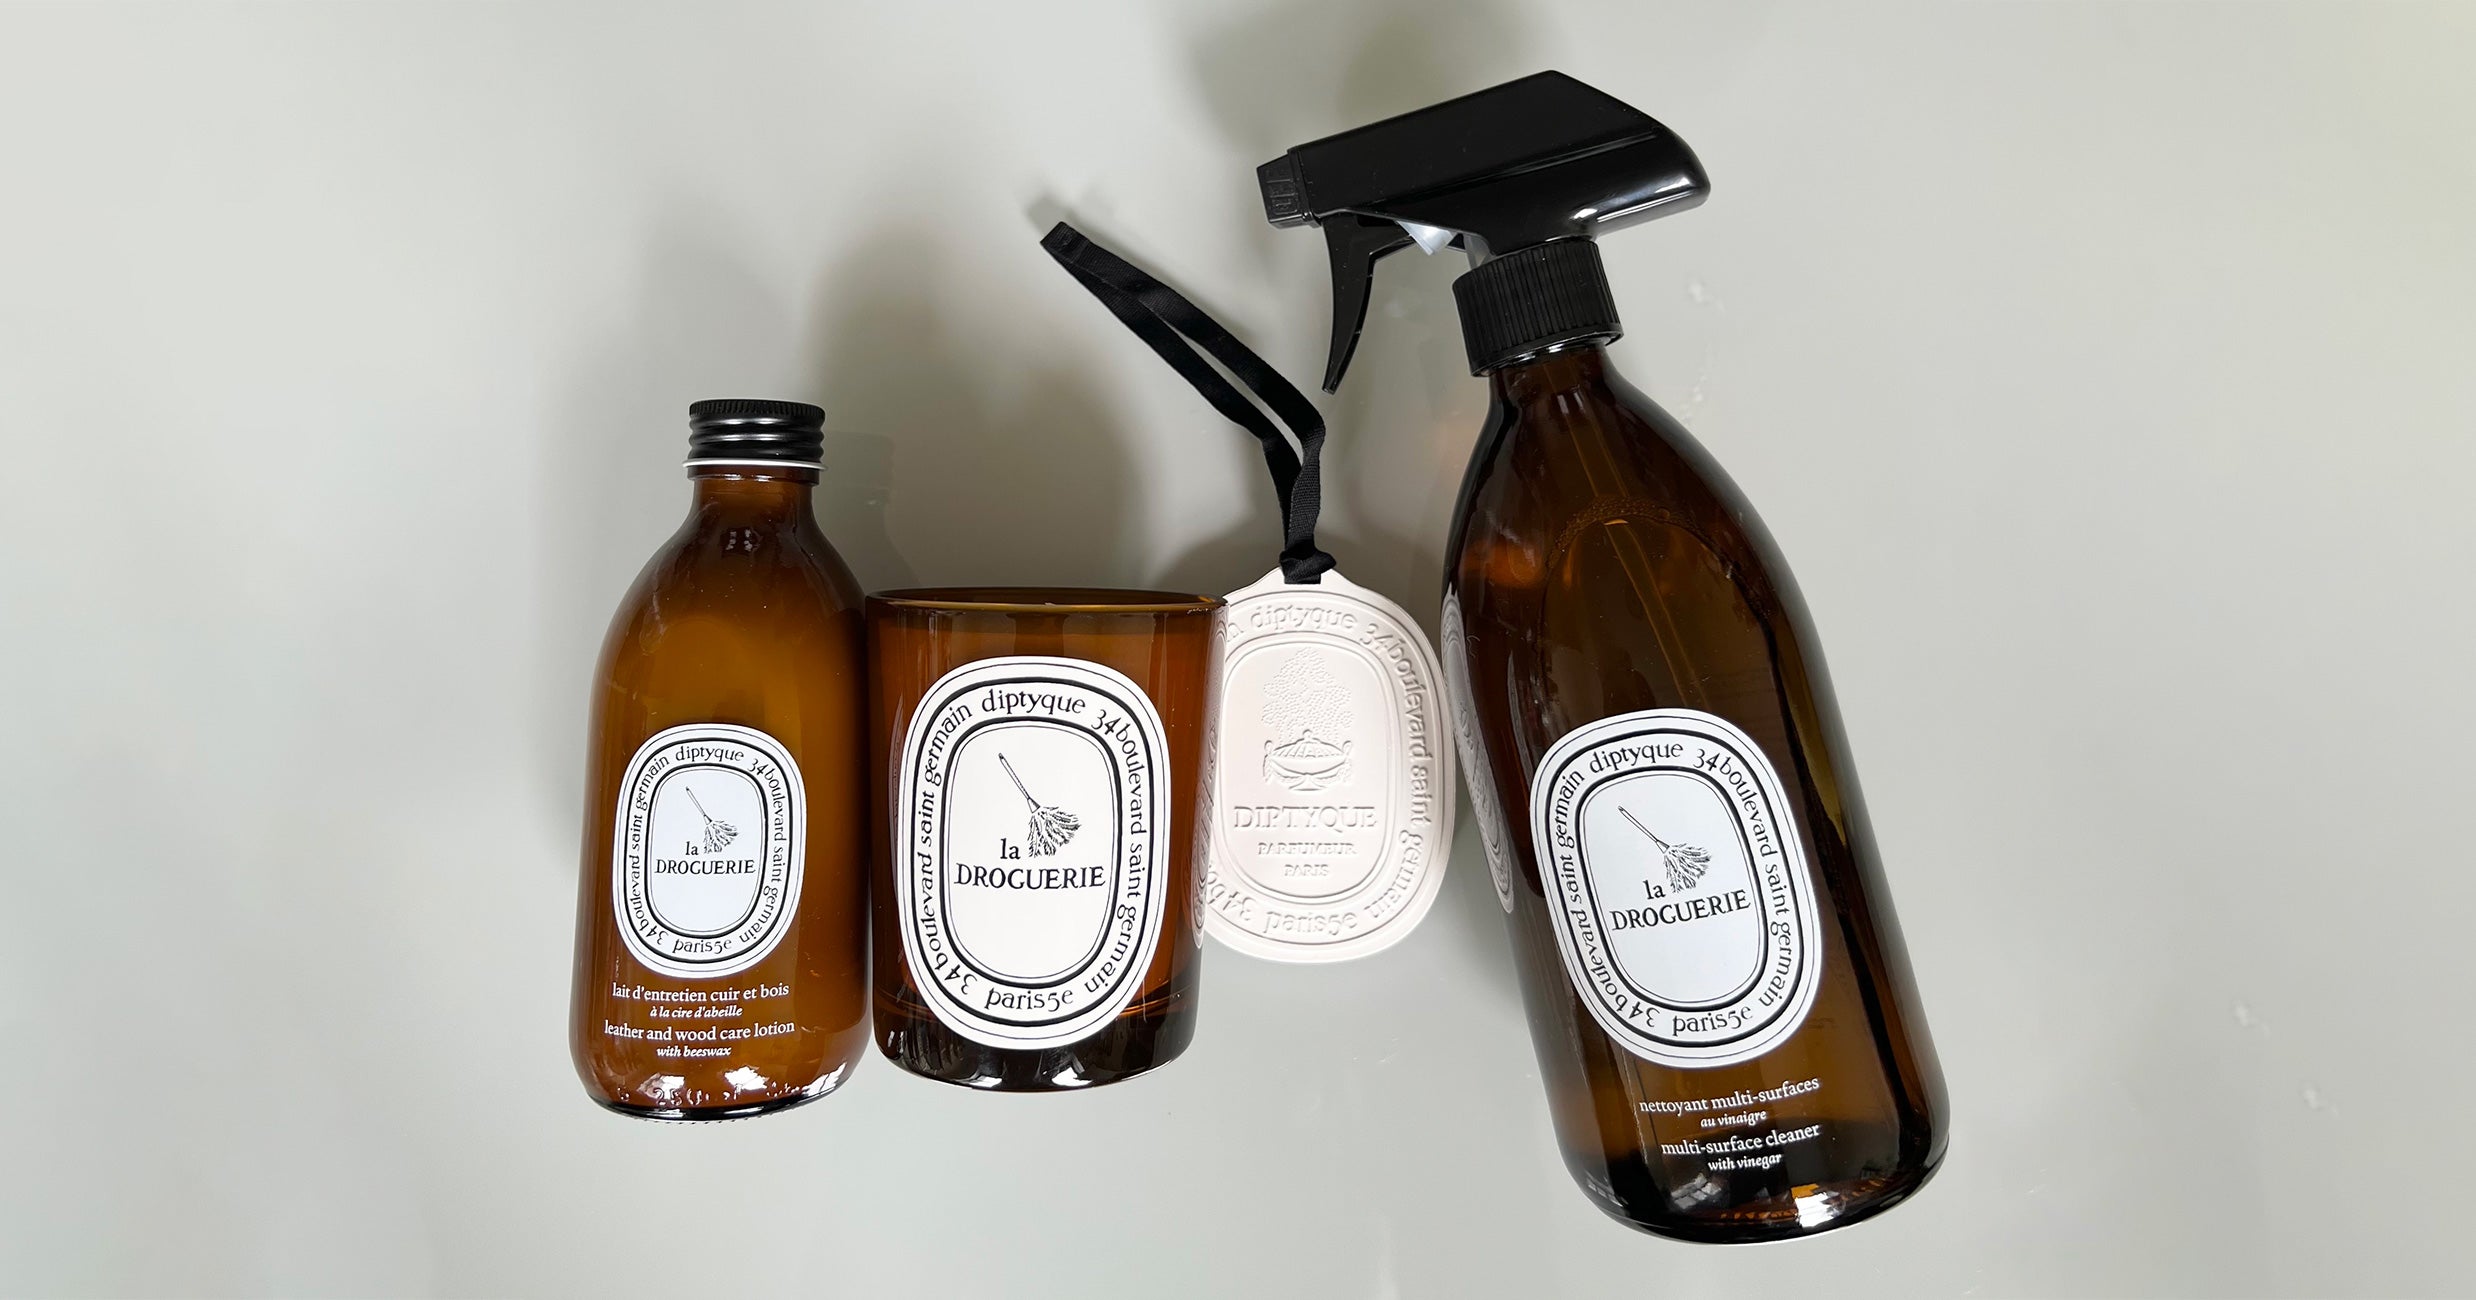 Diptyque Launched a Luxury Home Cleaning Collection